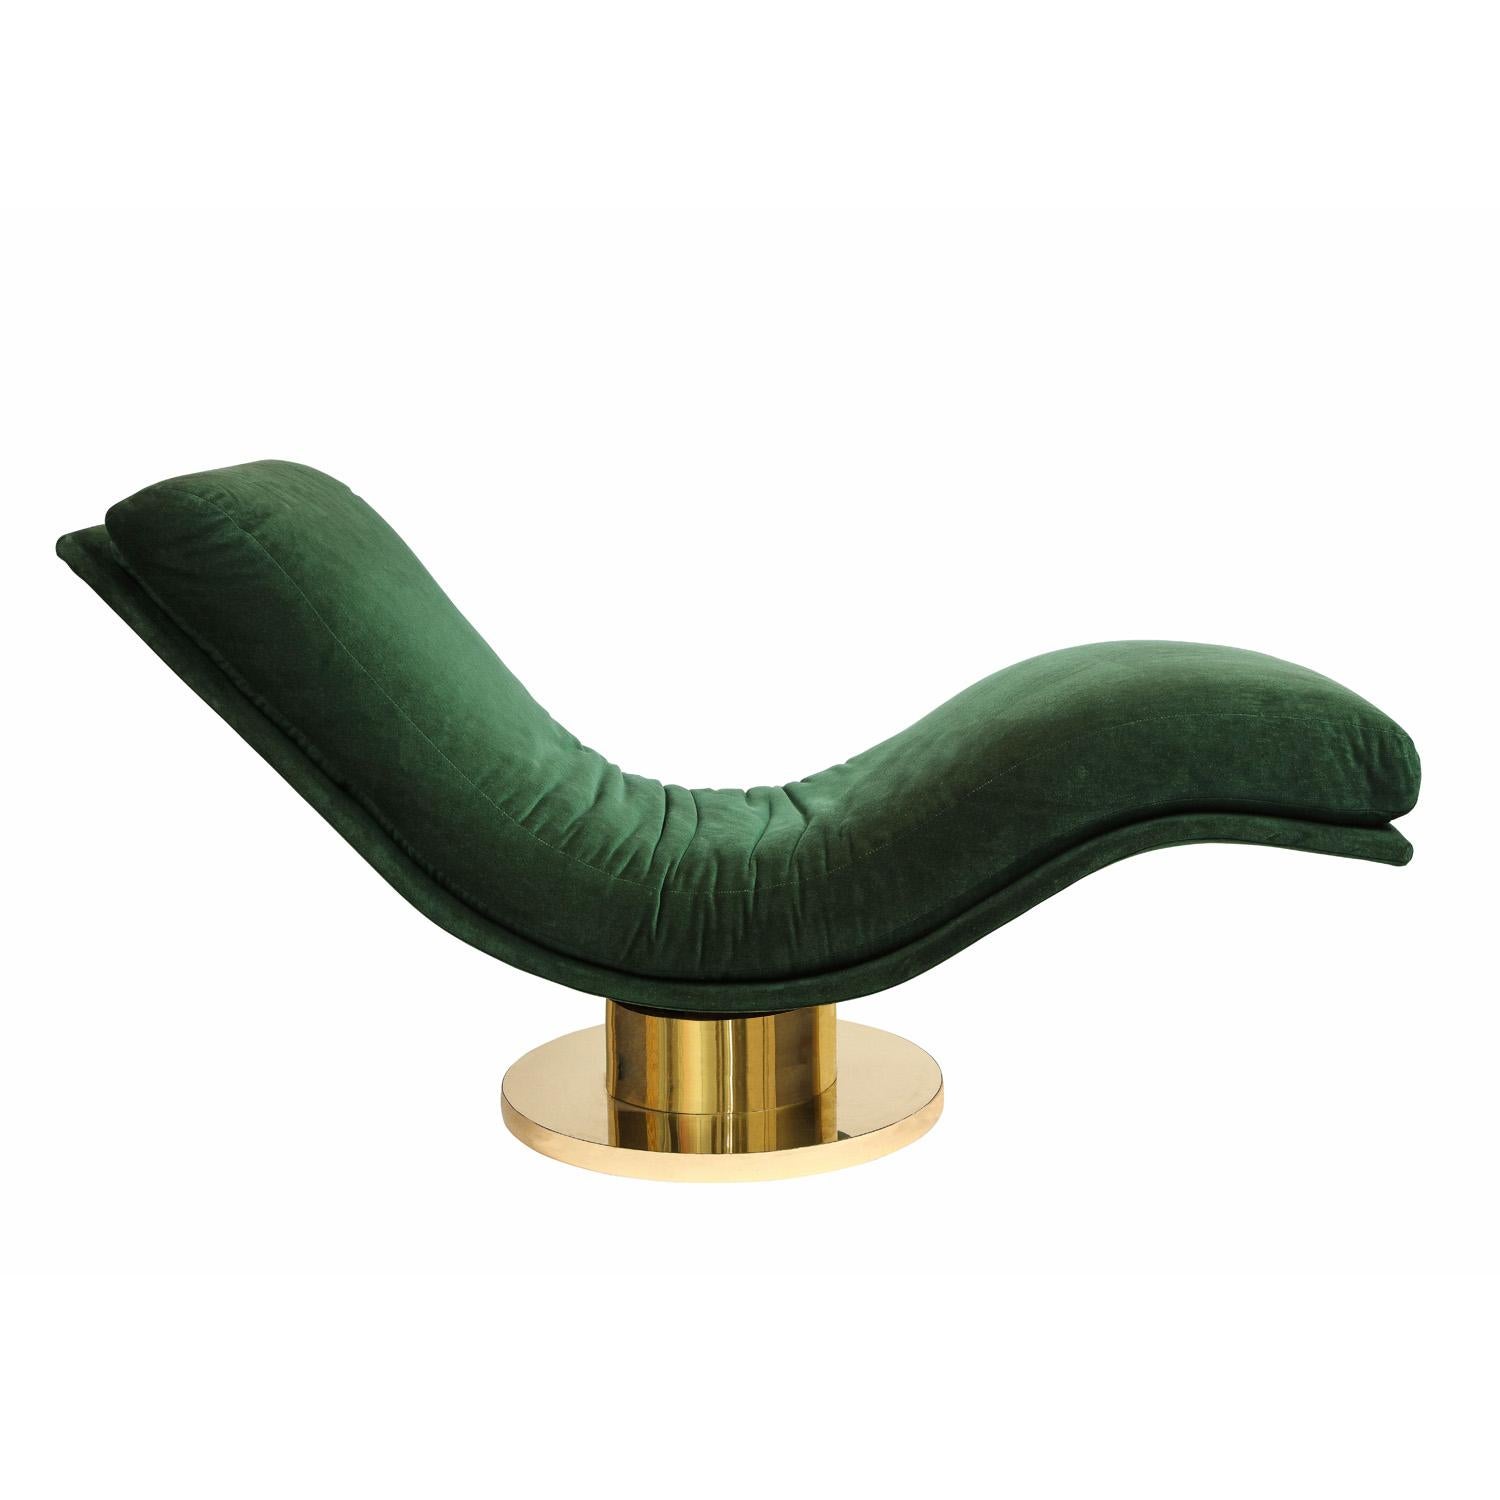 Iconic sculptural rocking and swiveling chaise in green velvet on brass base by Milo Baughman for Thayer Coggin, American 1970's (paper label on bottom reads “Thayer Coggin Inc”). This chaise is super chic and extremely comfortable. This is